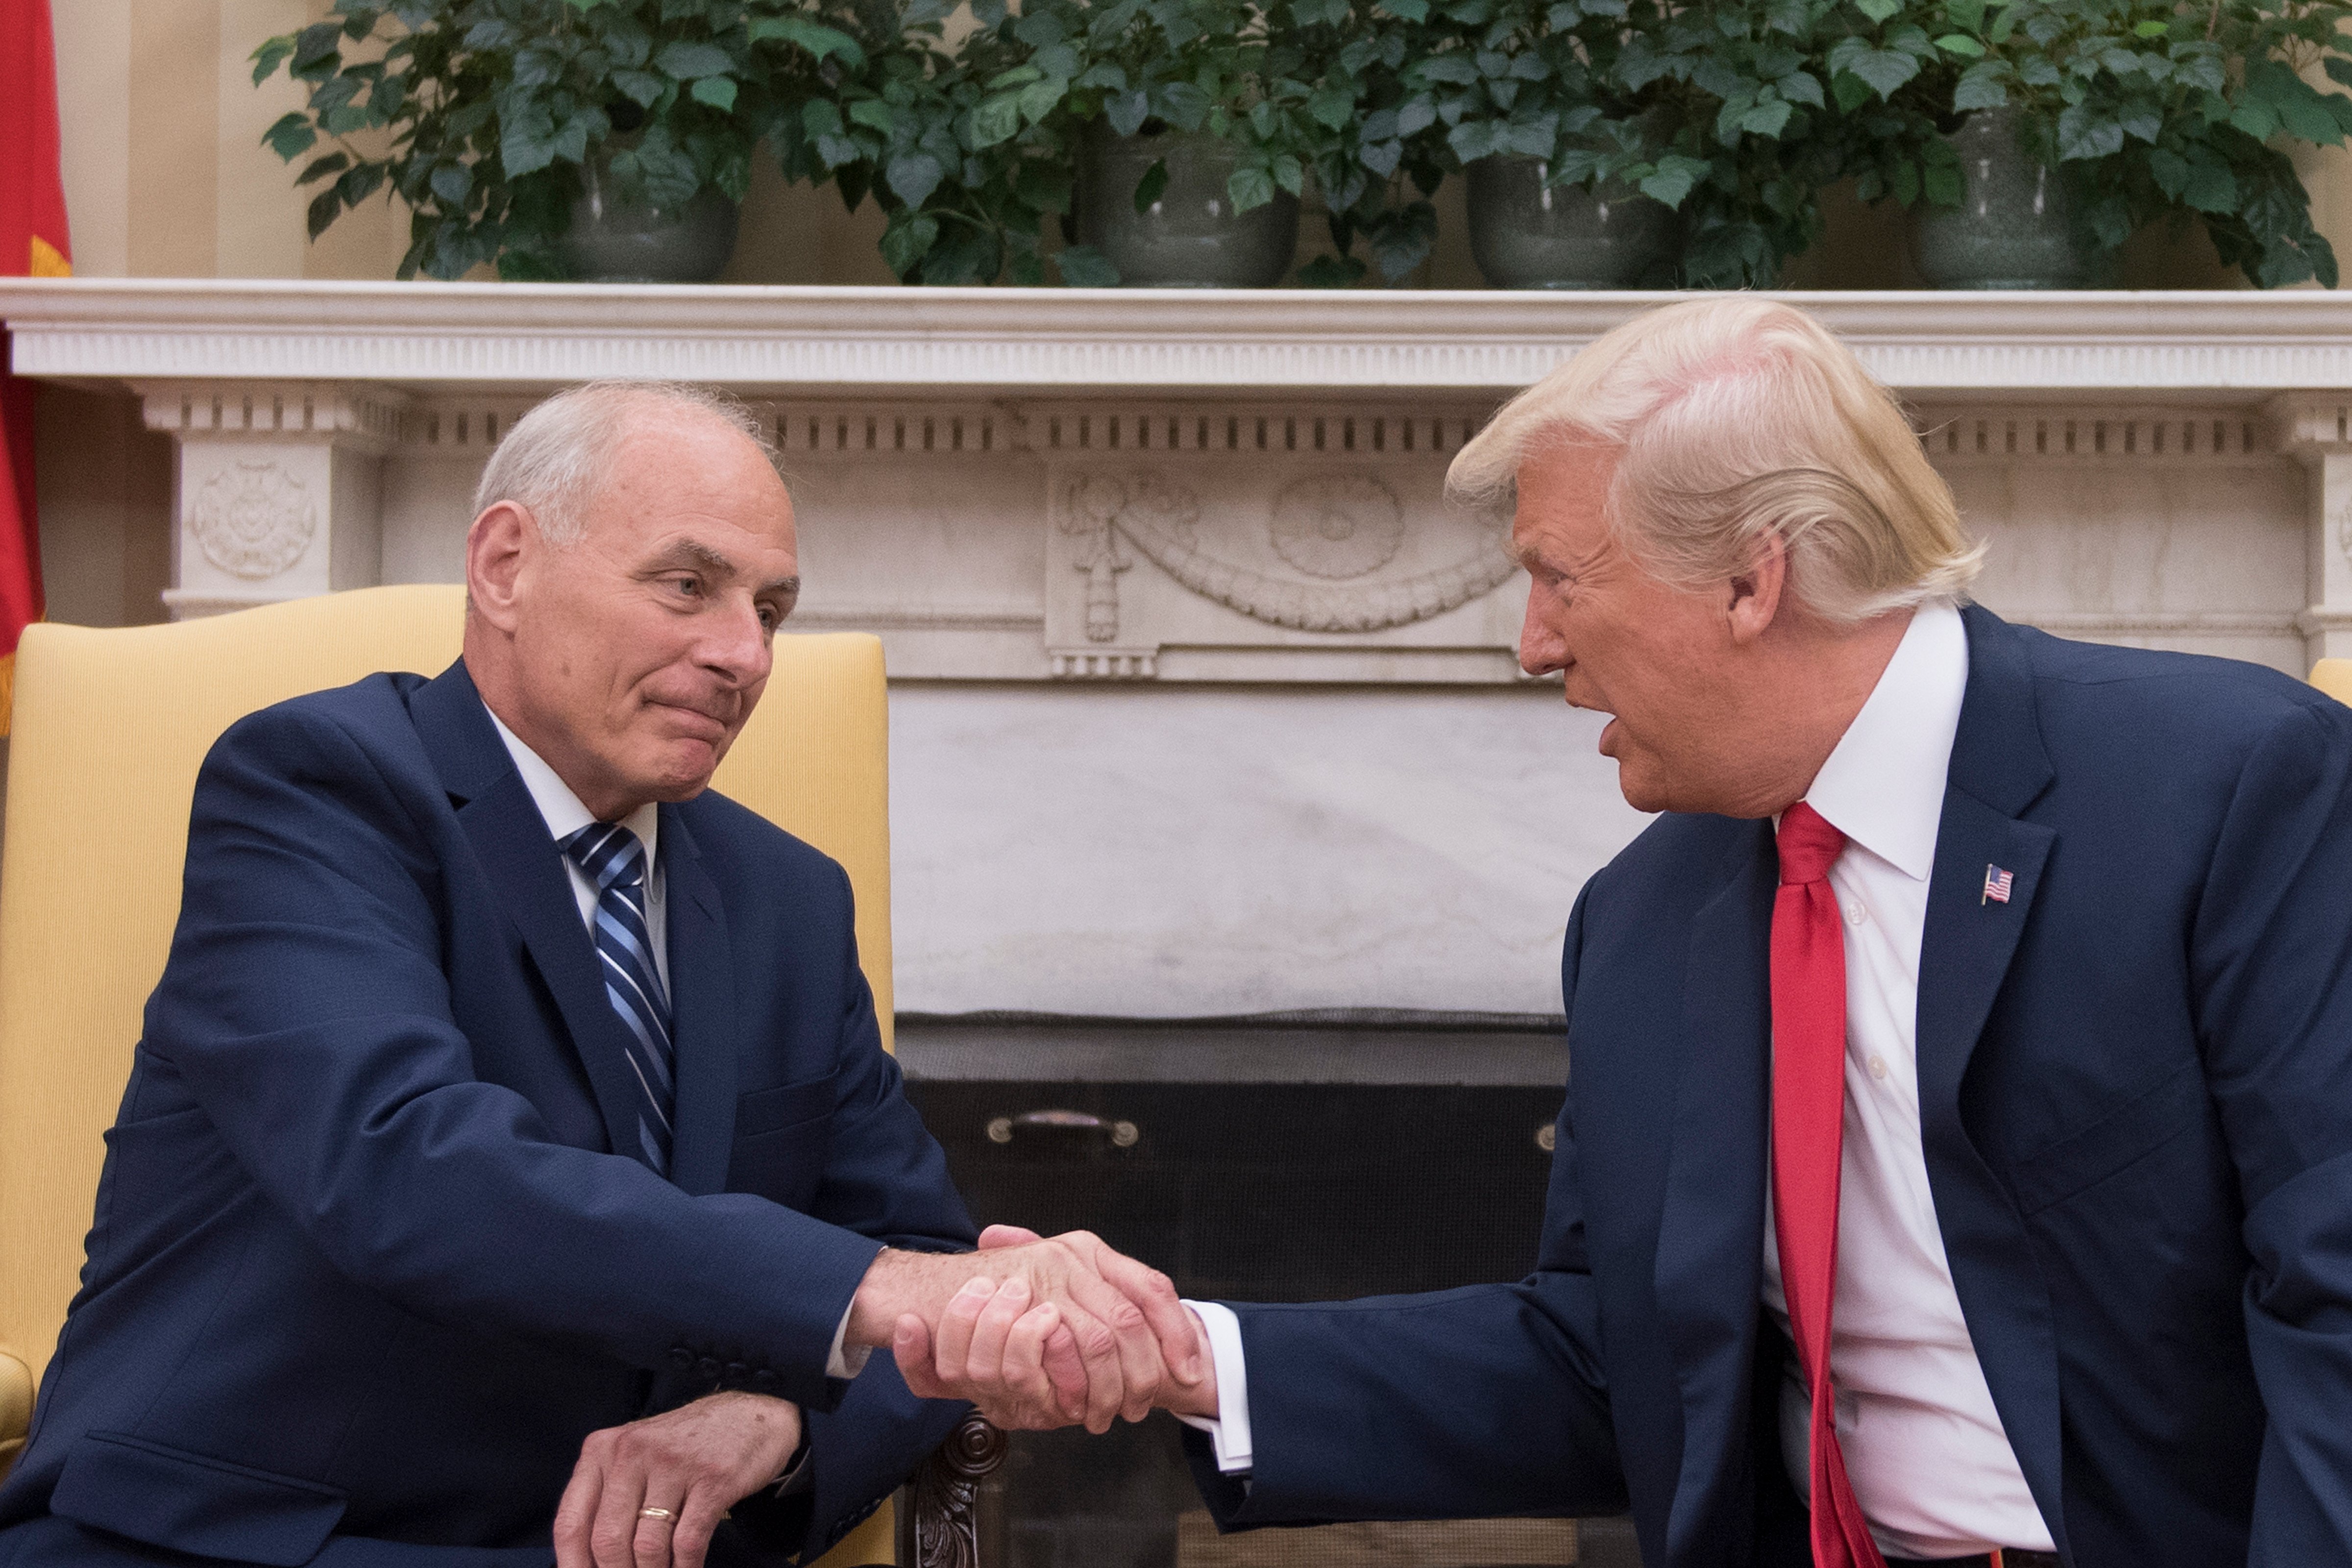 President Donald Trump (R) shakes hands with newly sworn-in White House Chief of Staff John Kelly at the White House in Washington, D.C., on July 31, 2017. (Jim Watson—AFP/Getty Images)